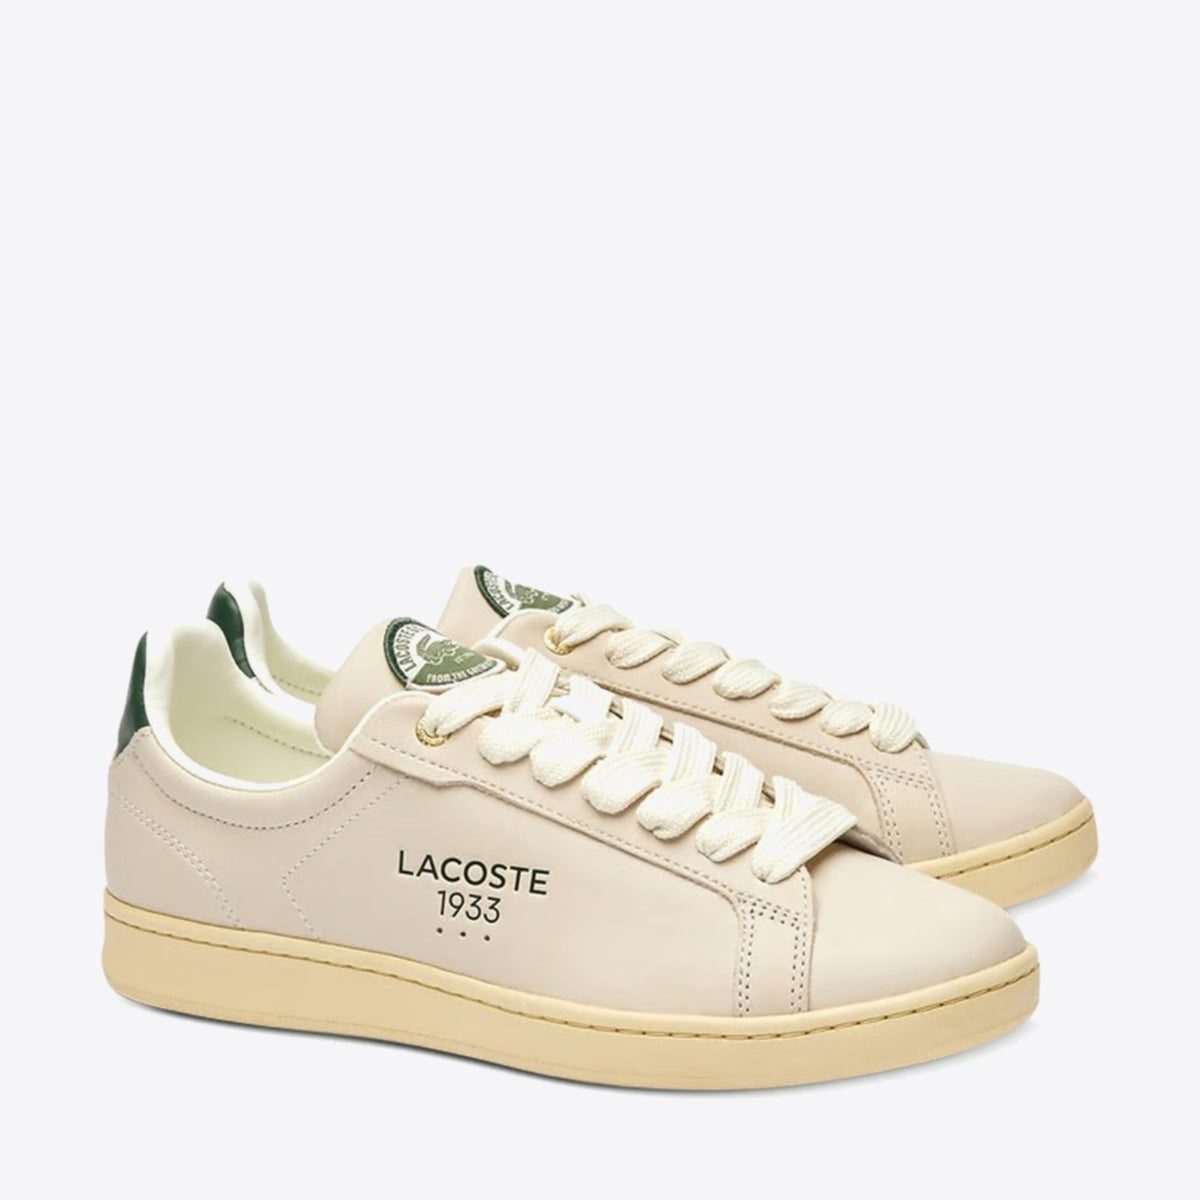 LACOSTE Carnaby Pro 2235 Off White/Green - Image 2